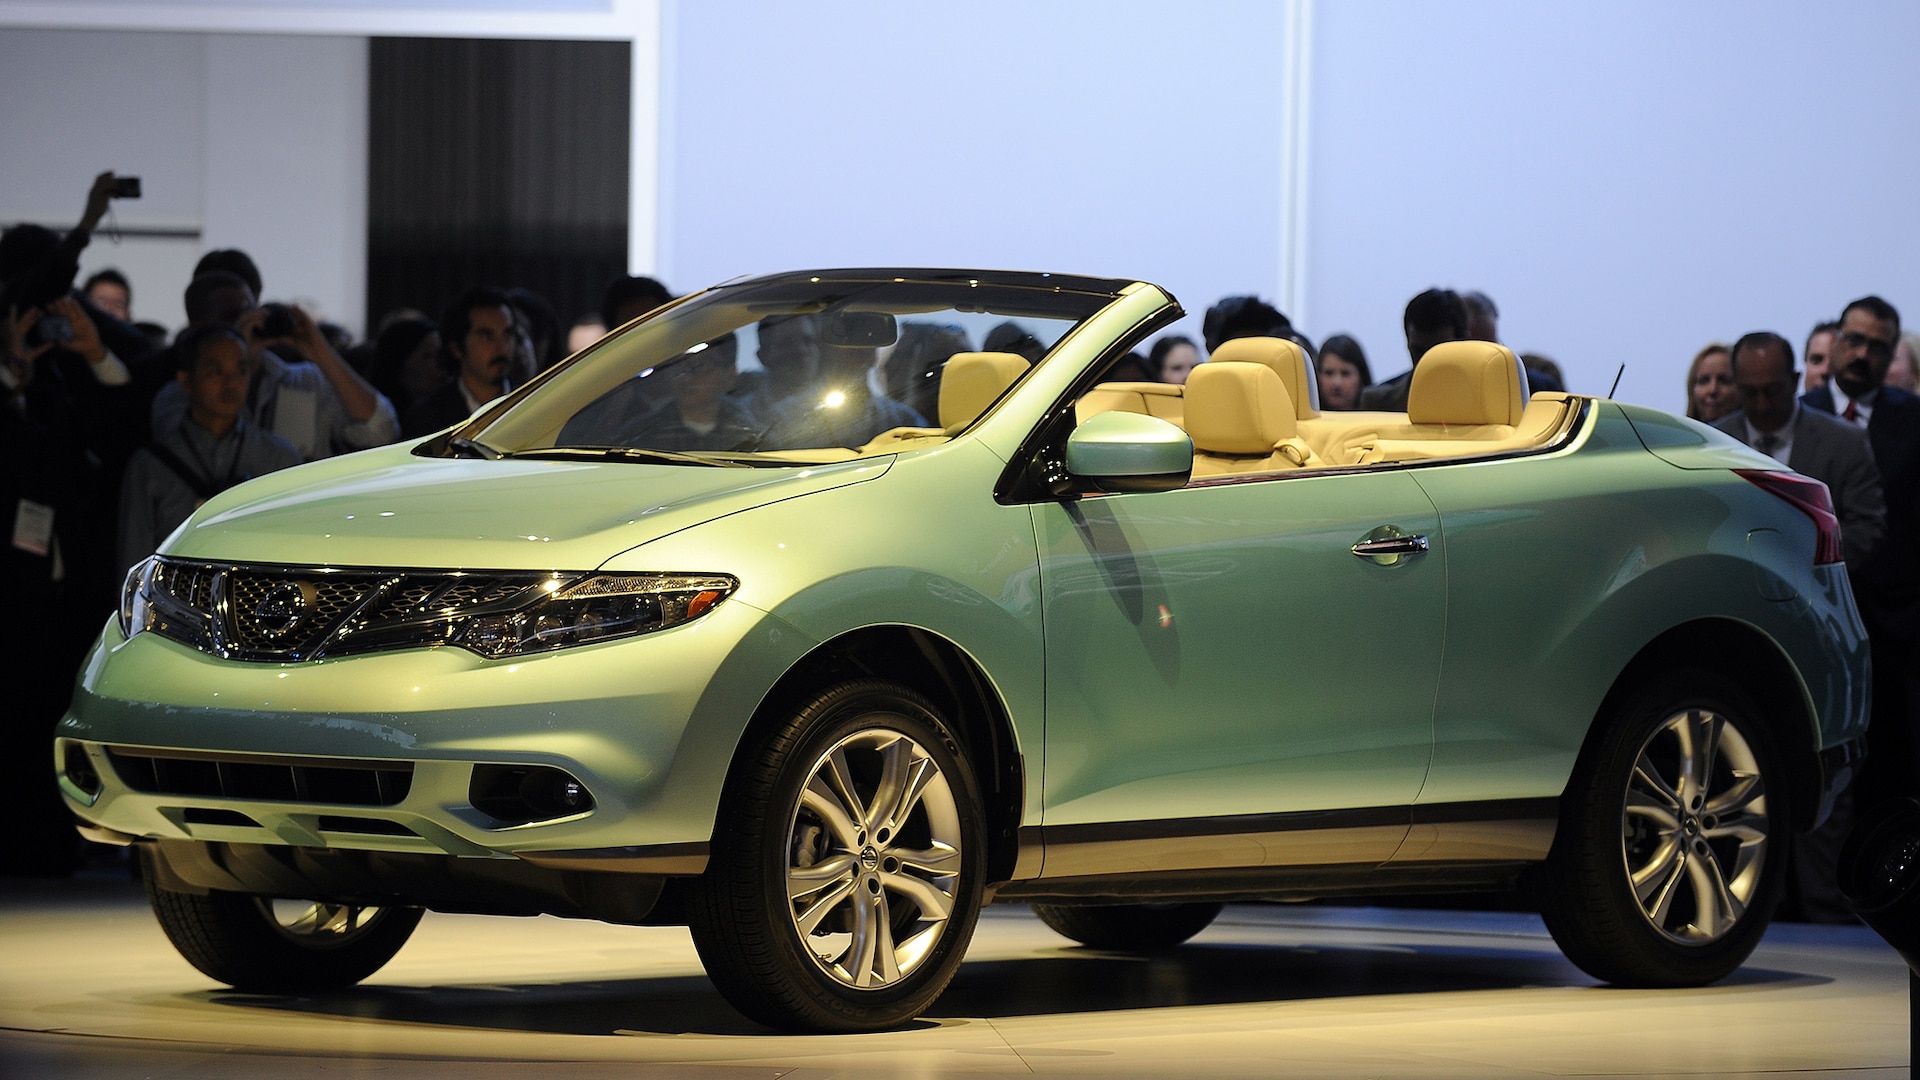 A Brief History of the Nissan Murano CrossCabriolet